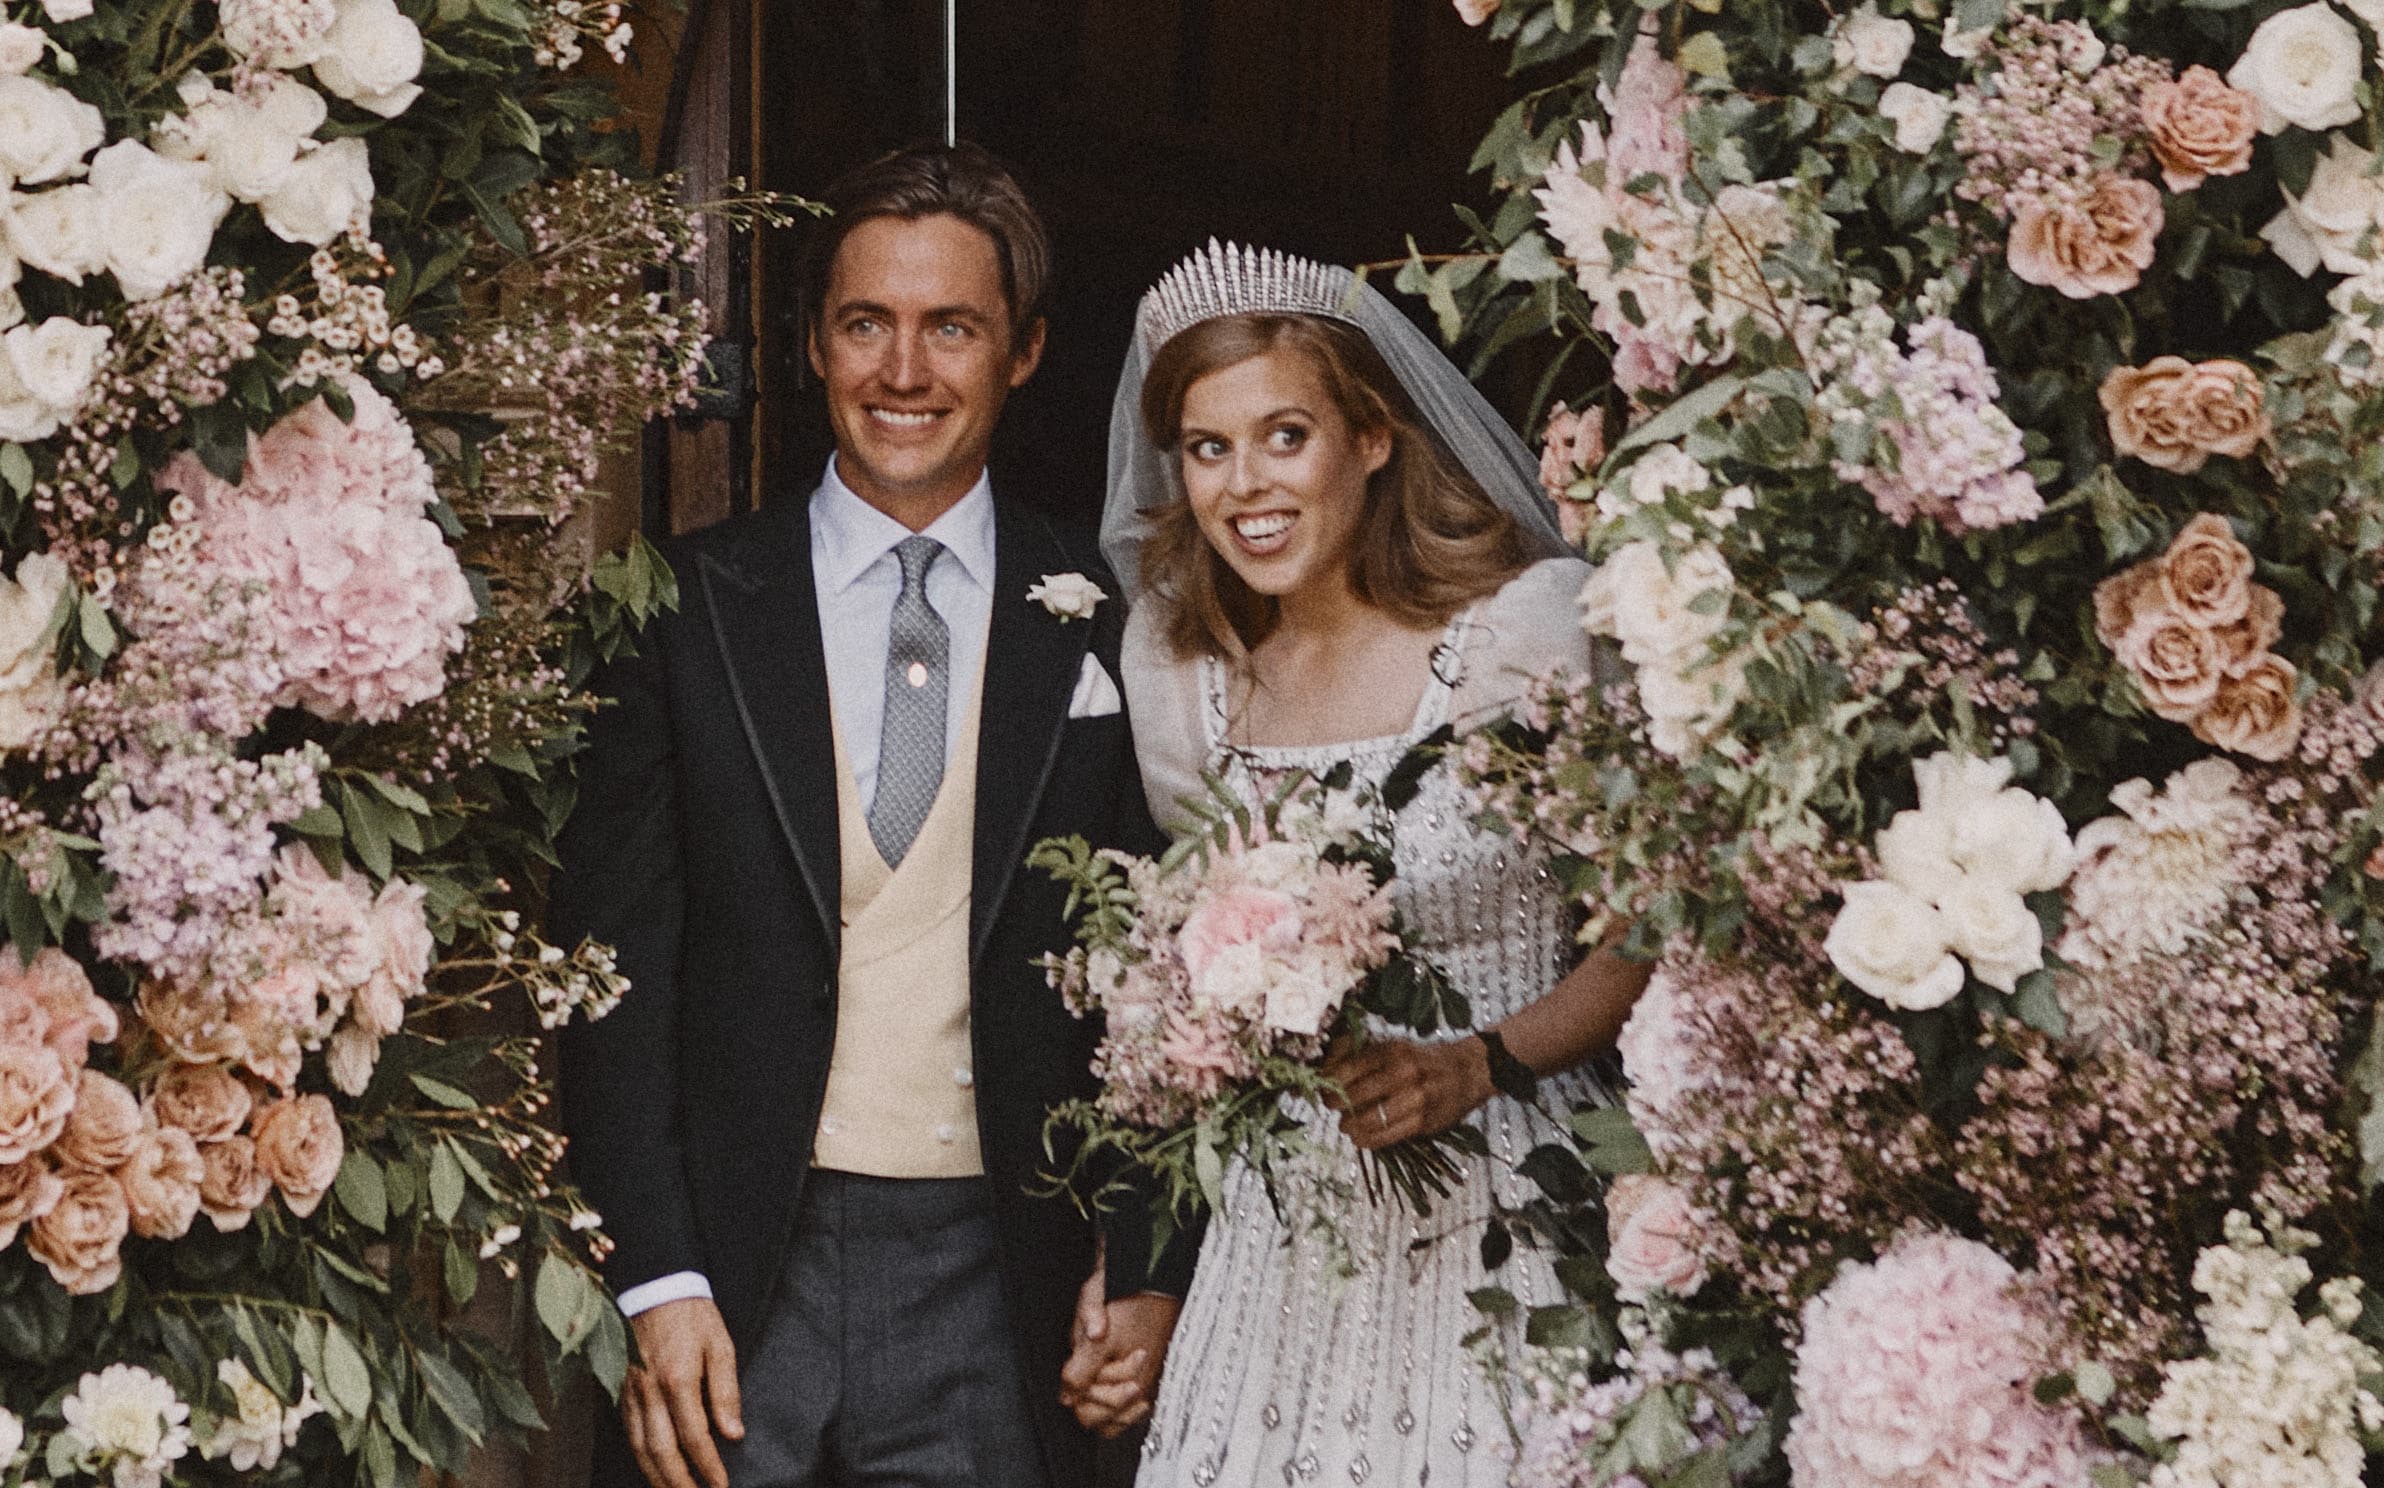 Britain's Princess Beatrice of York and her husband Edoardo Mapelli Mozzi leave The Royal Chapel of All Saints at Royal Lodge, Windsor, west of London, on July 17, 2020 after their marriage ceremony.